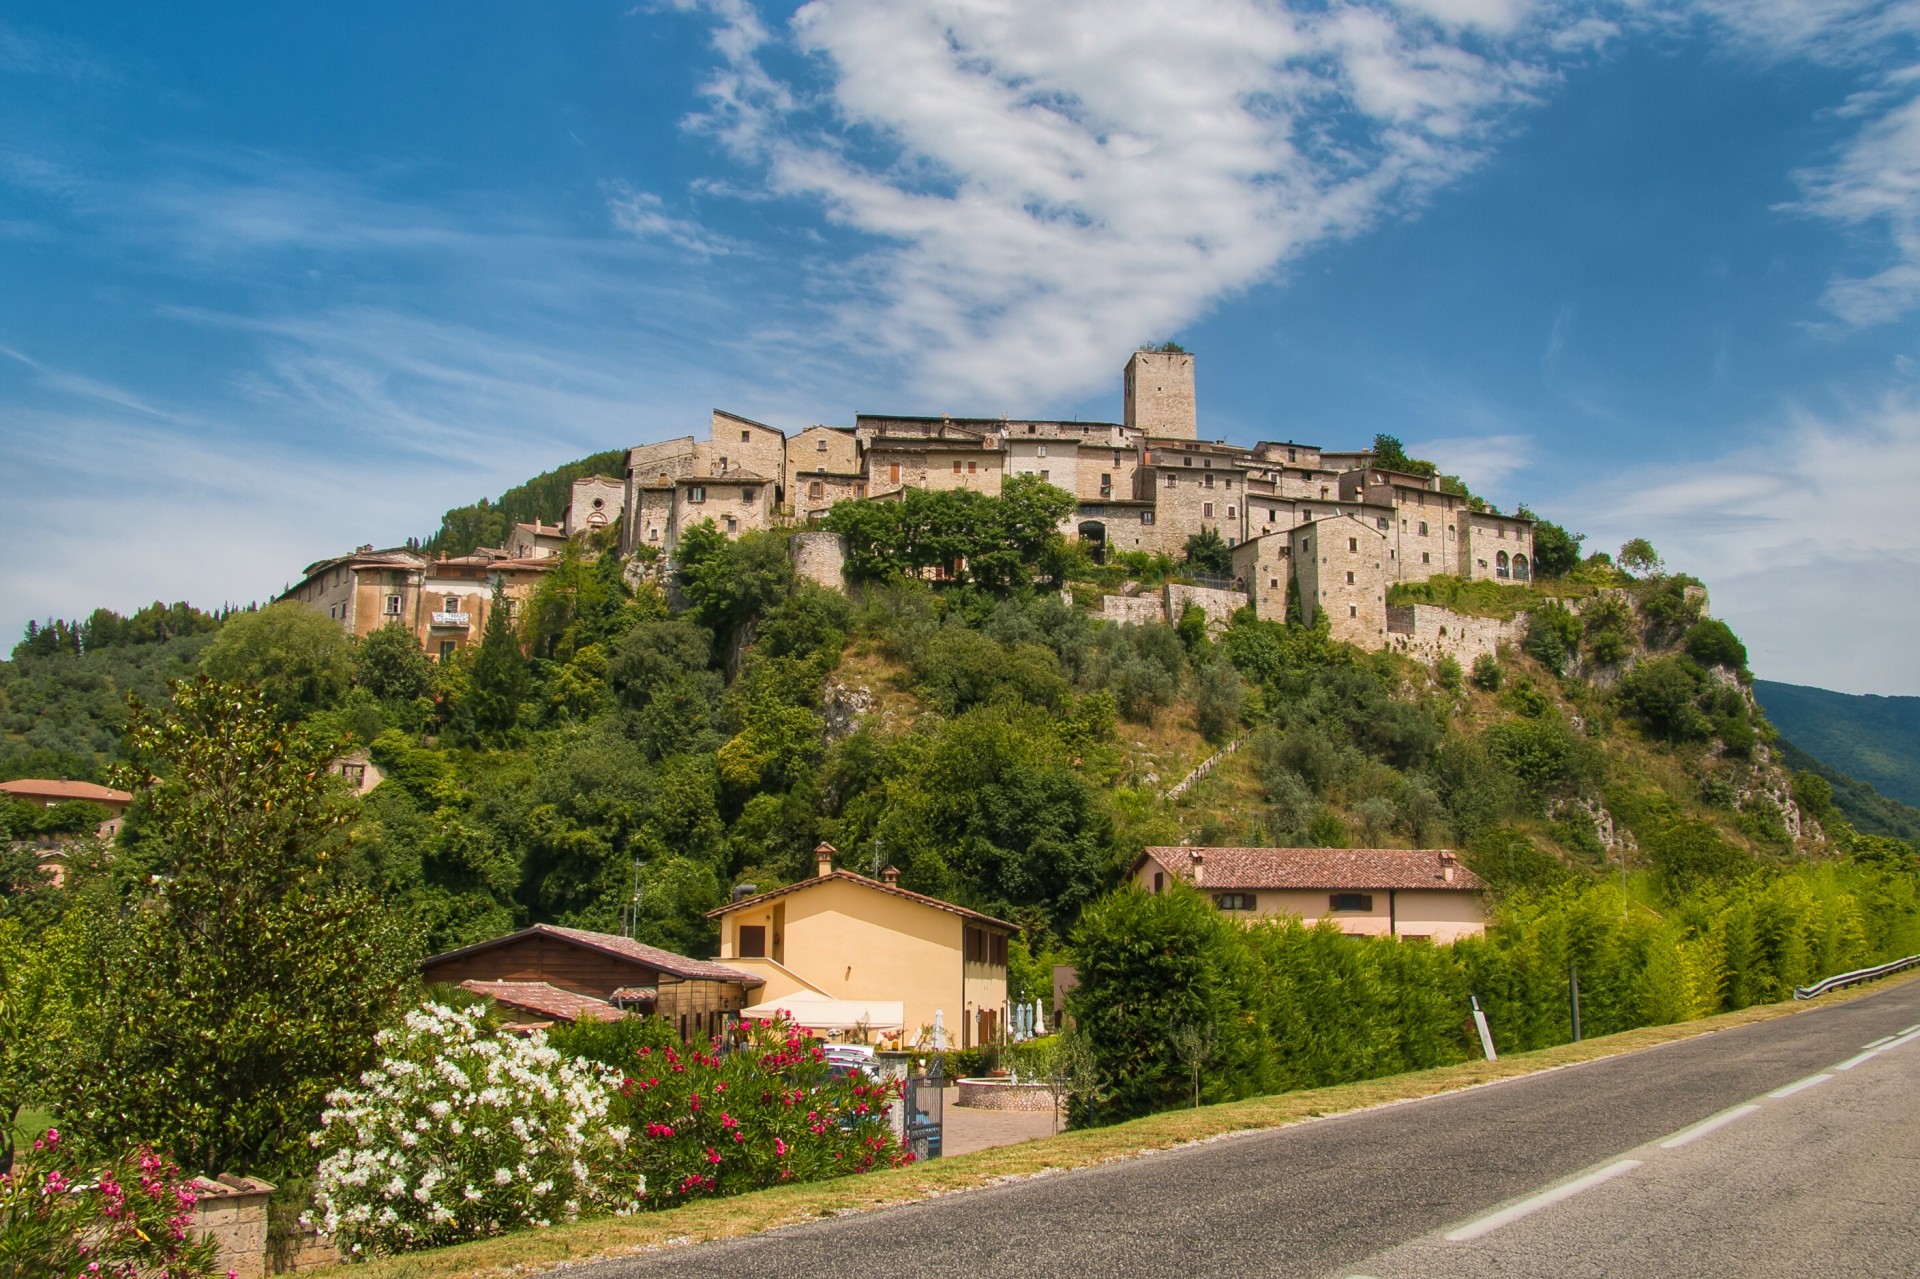 THE ARRONI FAMILY AND AN UMBRIAN VILLAGE WITH NOBLE AND ANCIENT ORIGINS